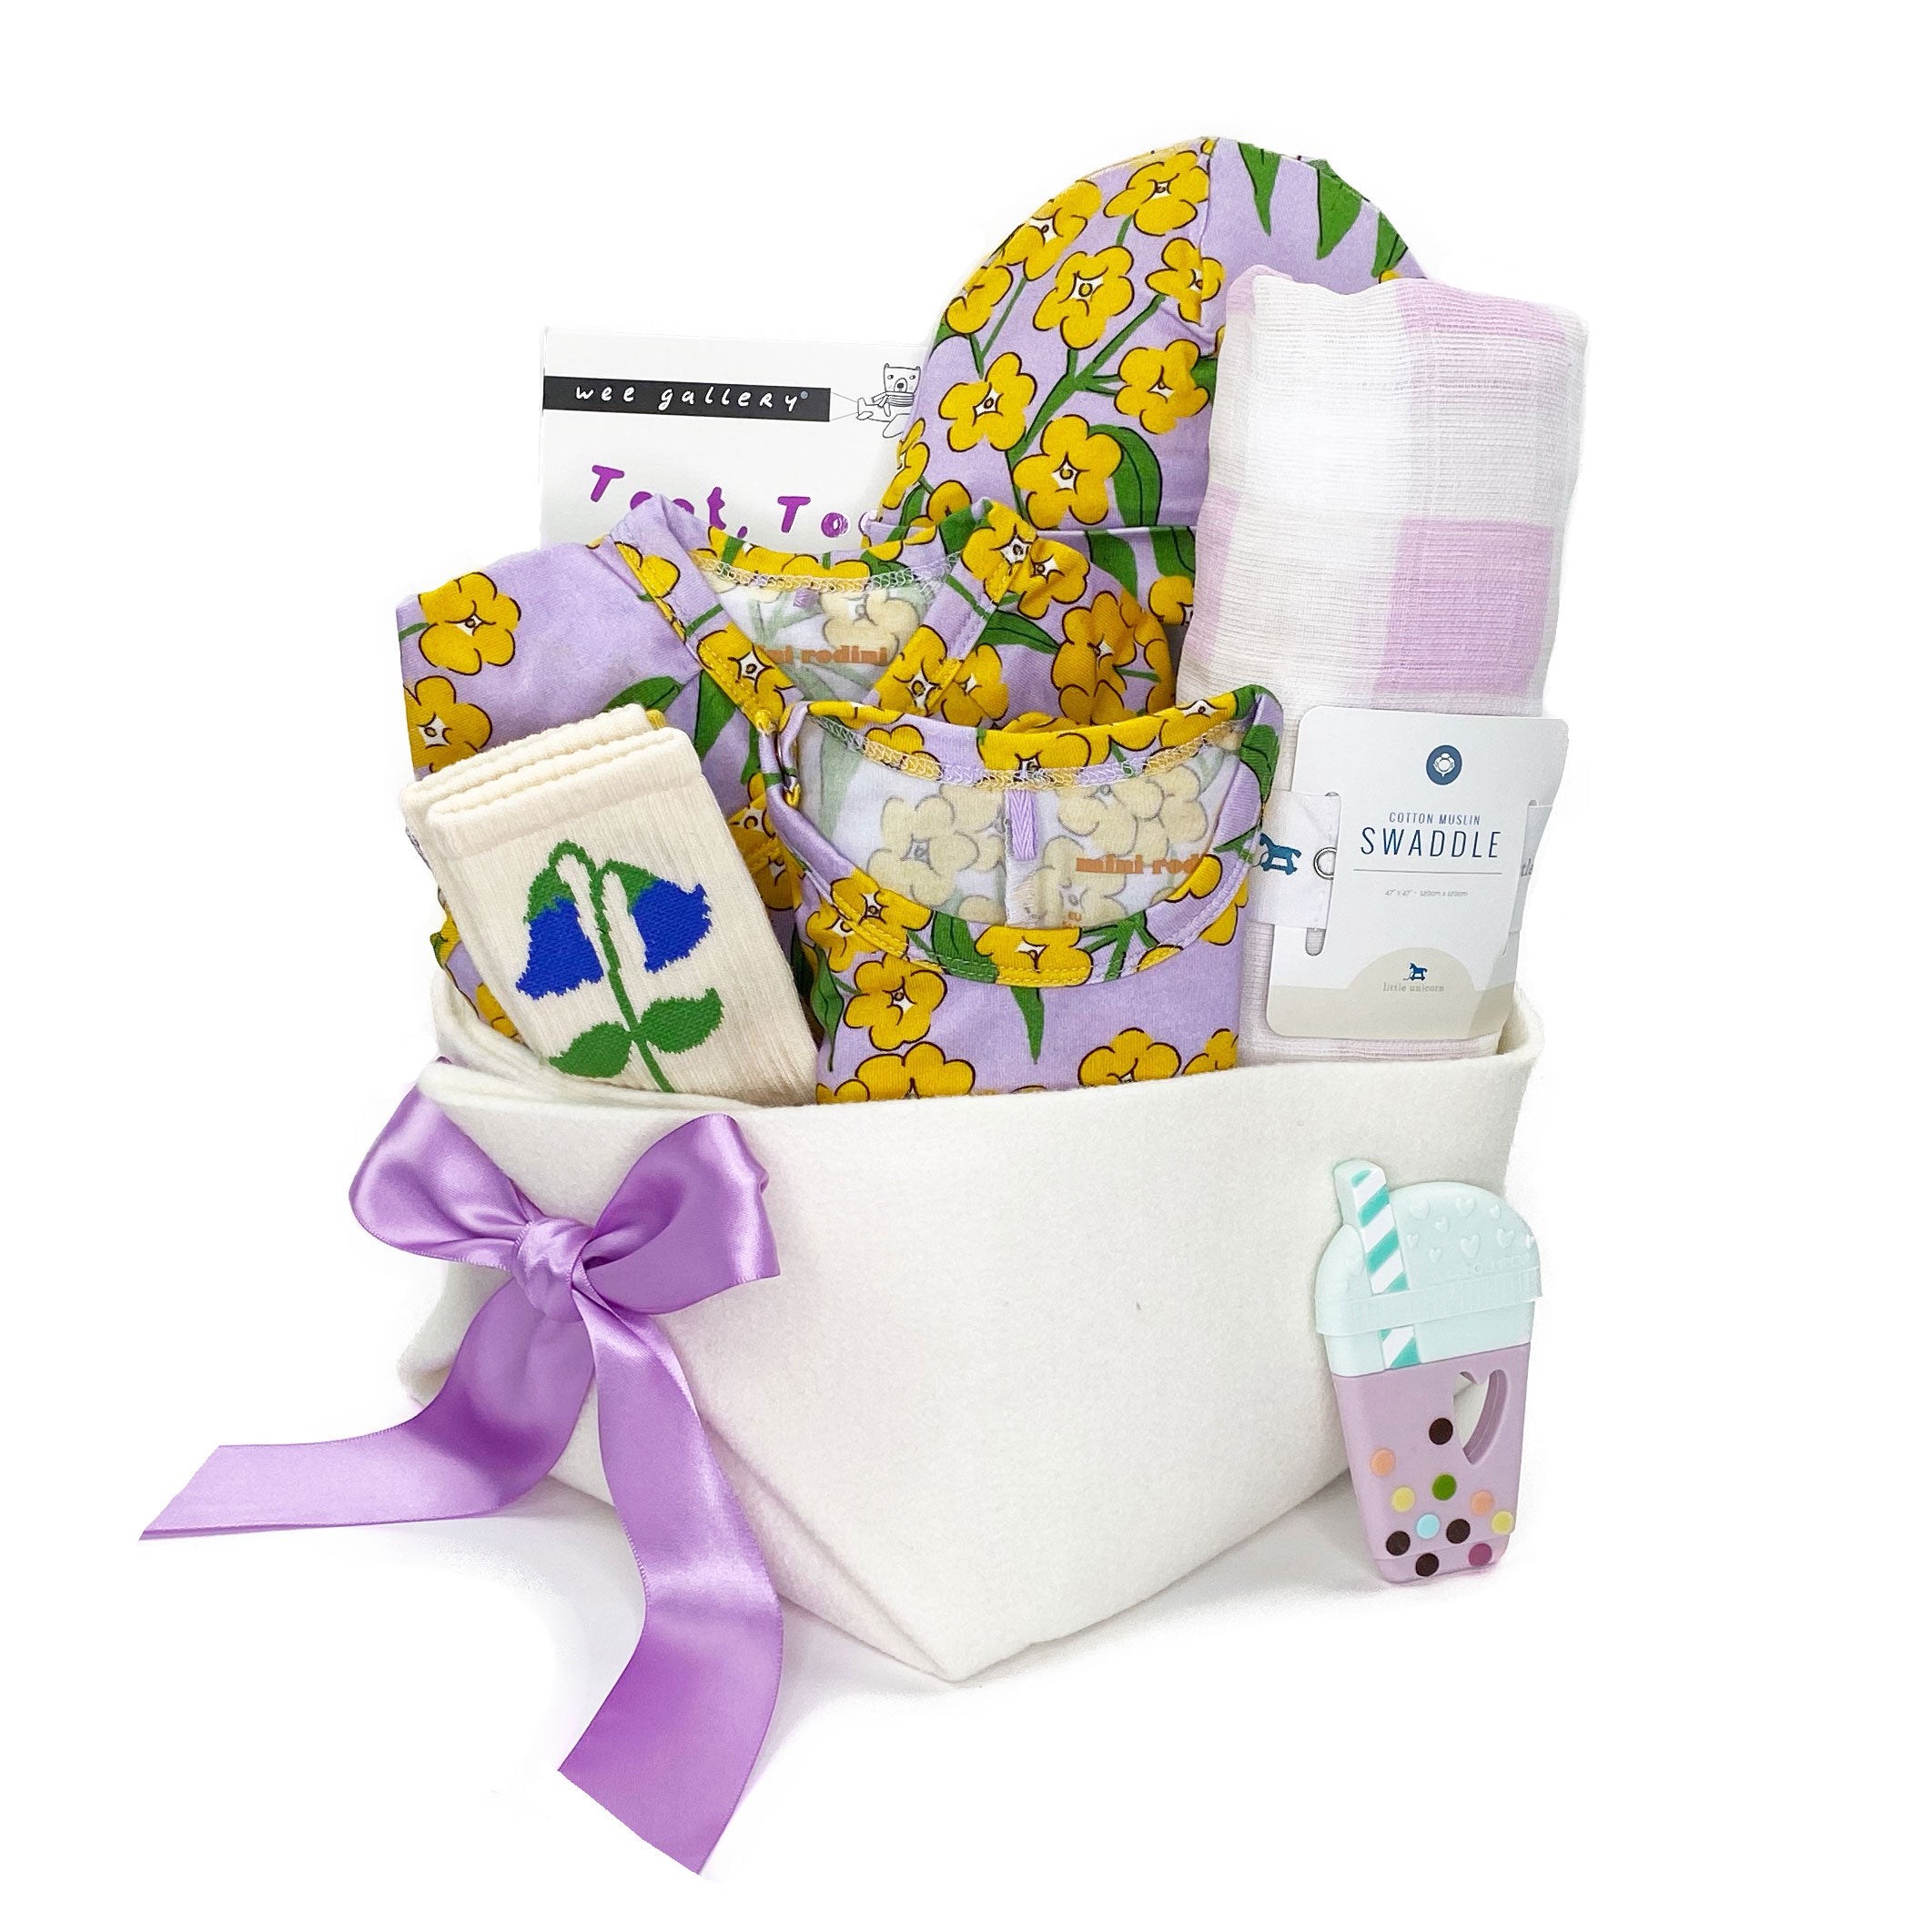 Mini Rodini Baby Girl Gift Basket  with winter flowers an adorable accessories at Bonjour Baby Baskets